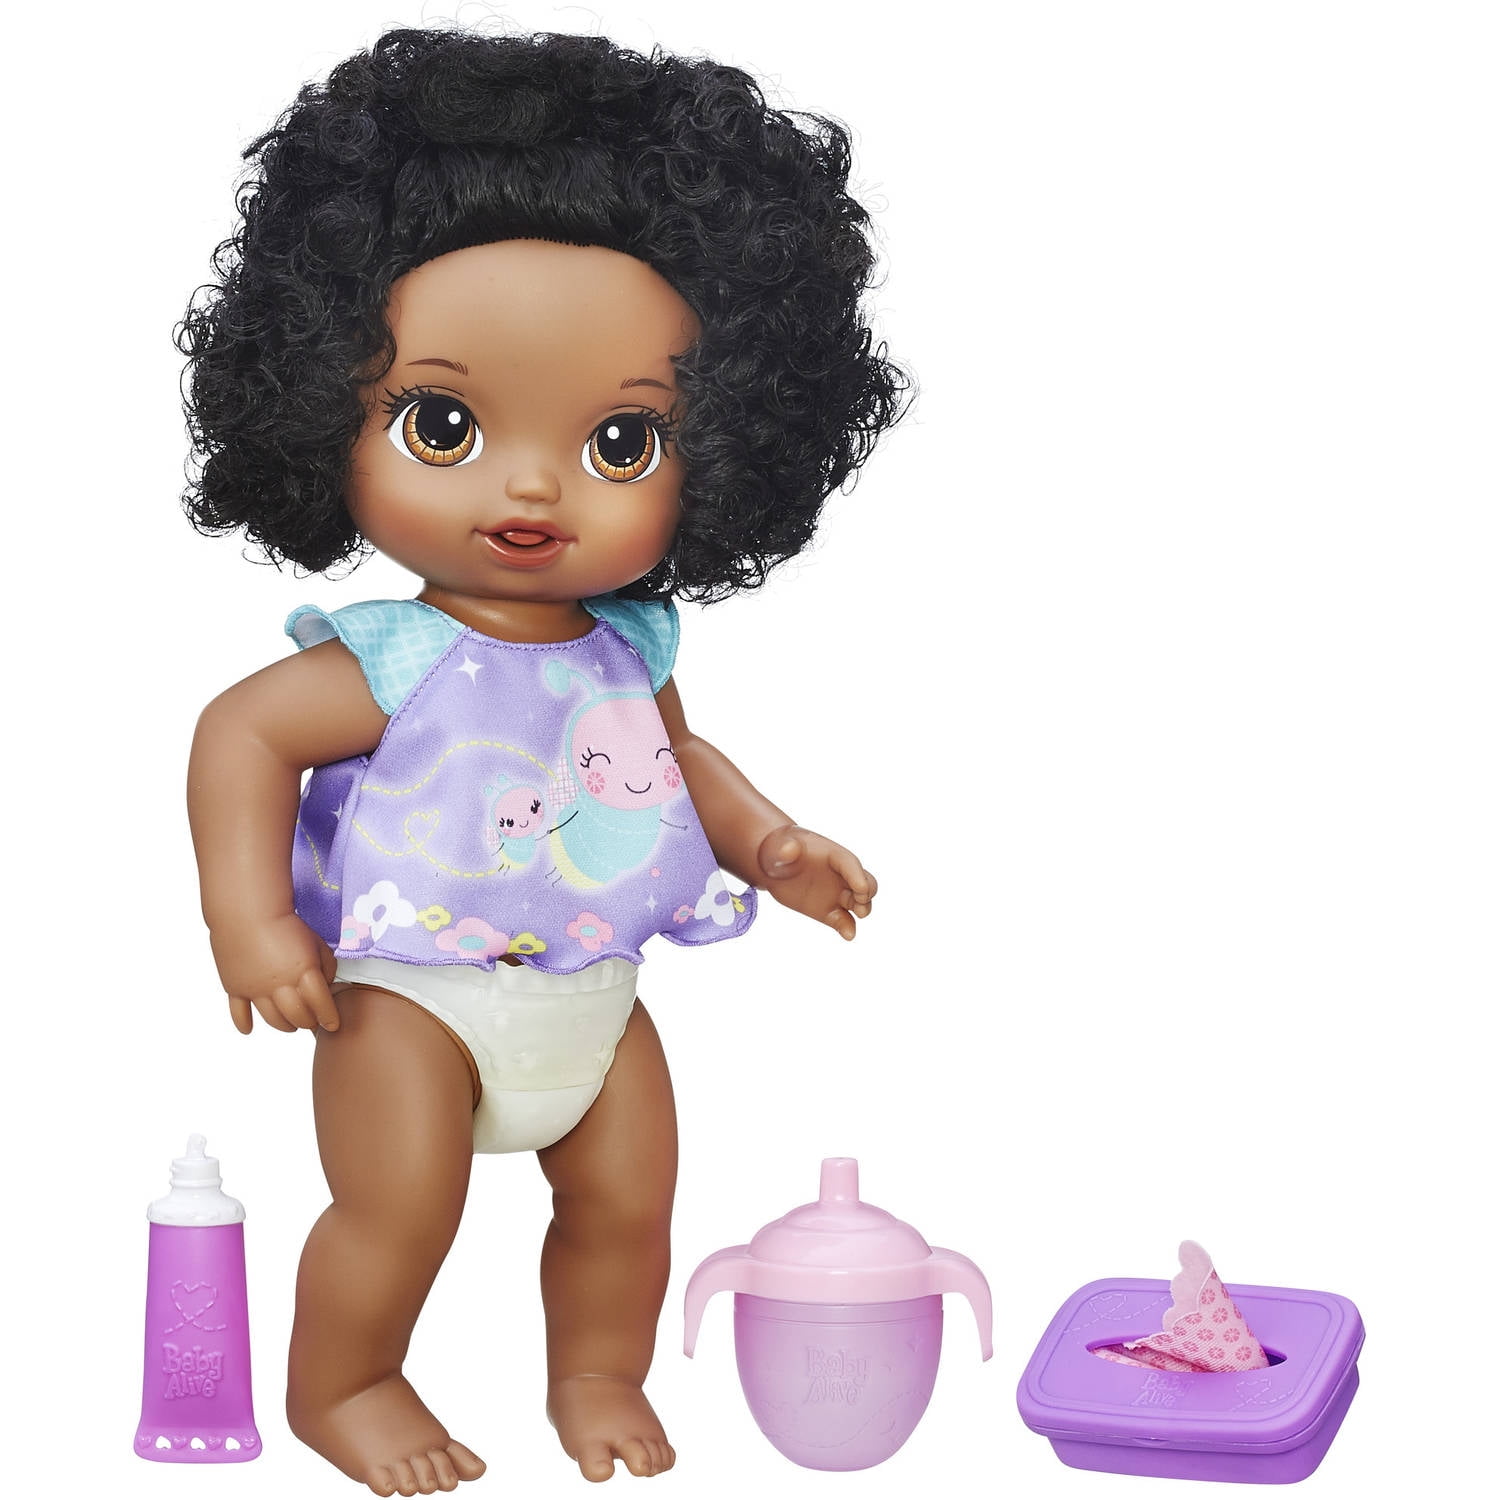 Rush Fs: Baby Alive Doll | General Santos City Classified ...